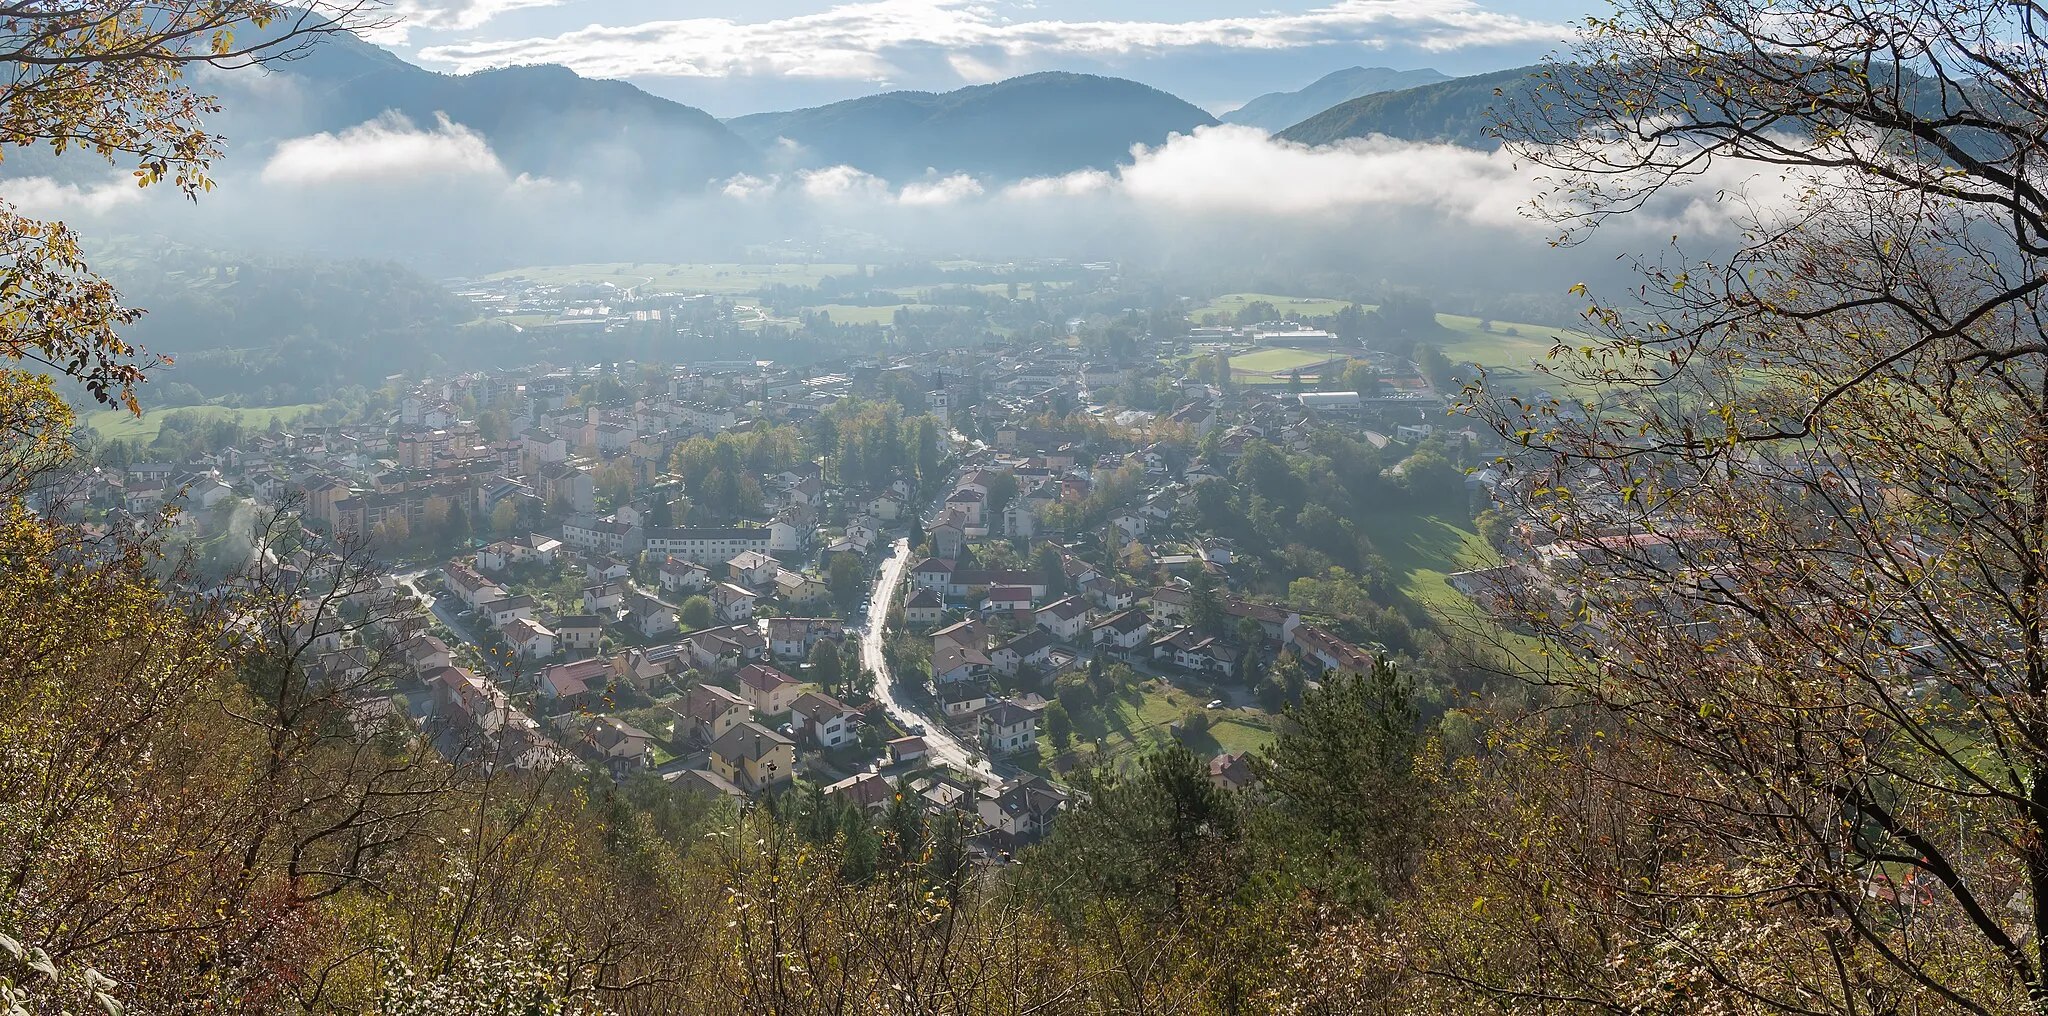 Image of Tolmin